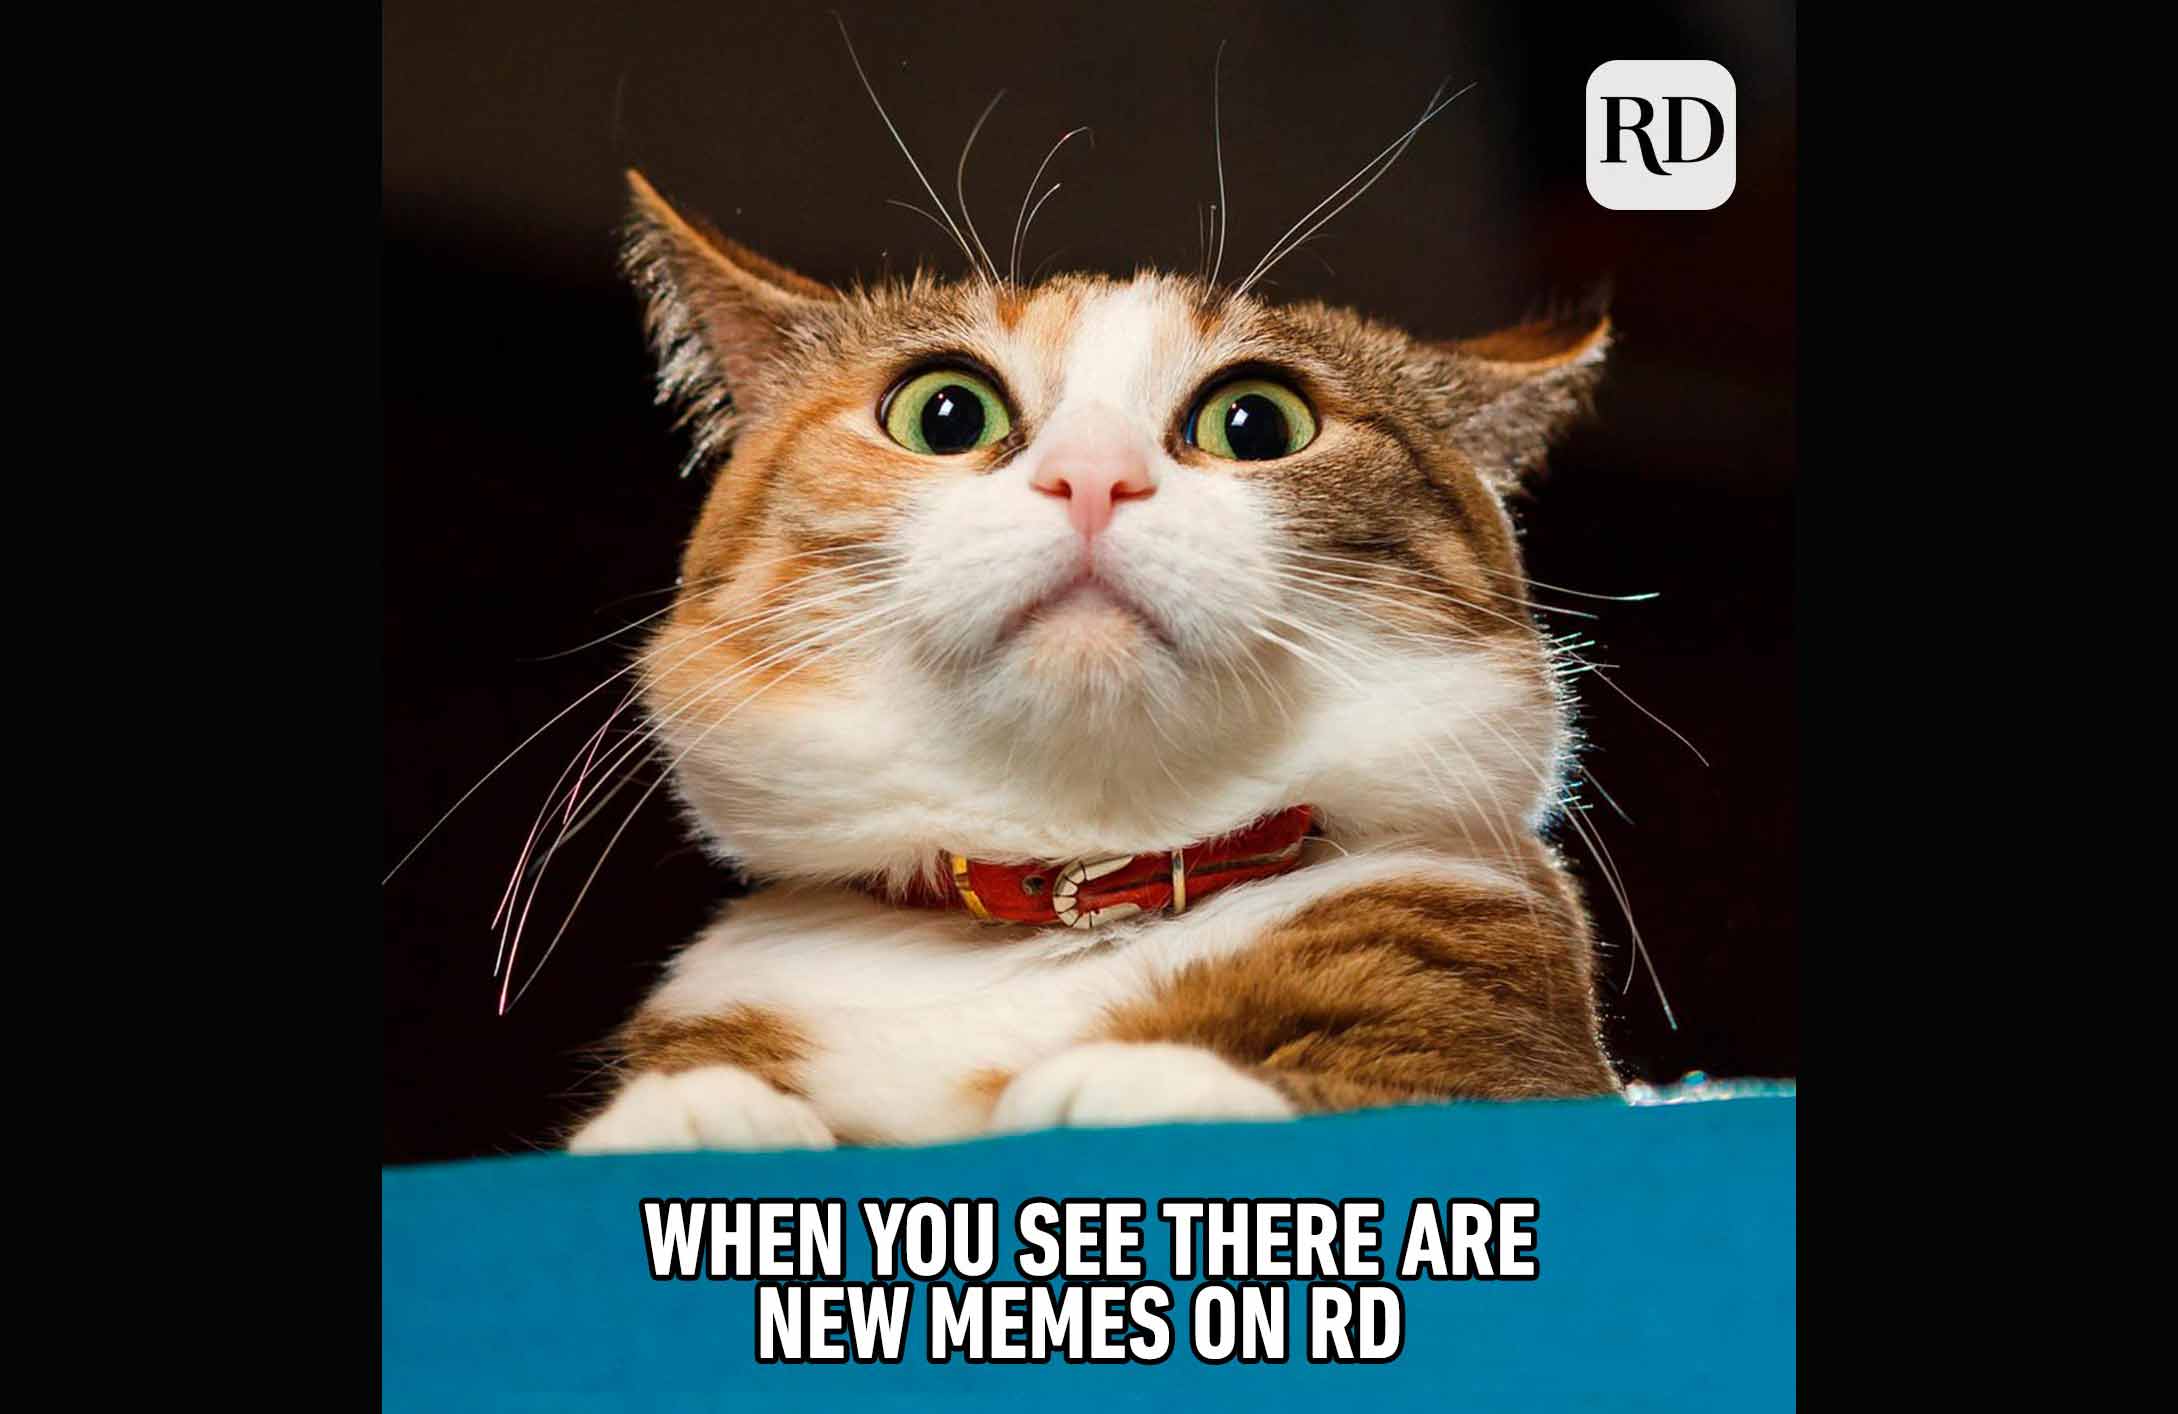 15 funny animal memes you can't help but laugh at | Reader's Digest New  Zealand